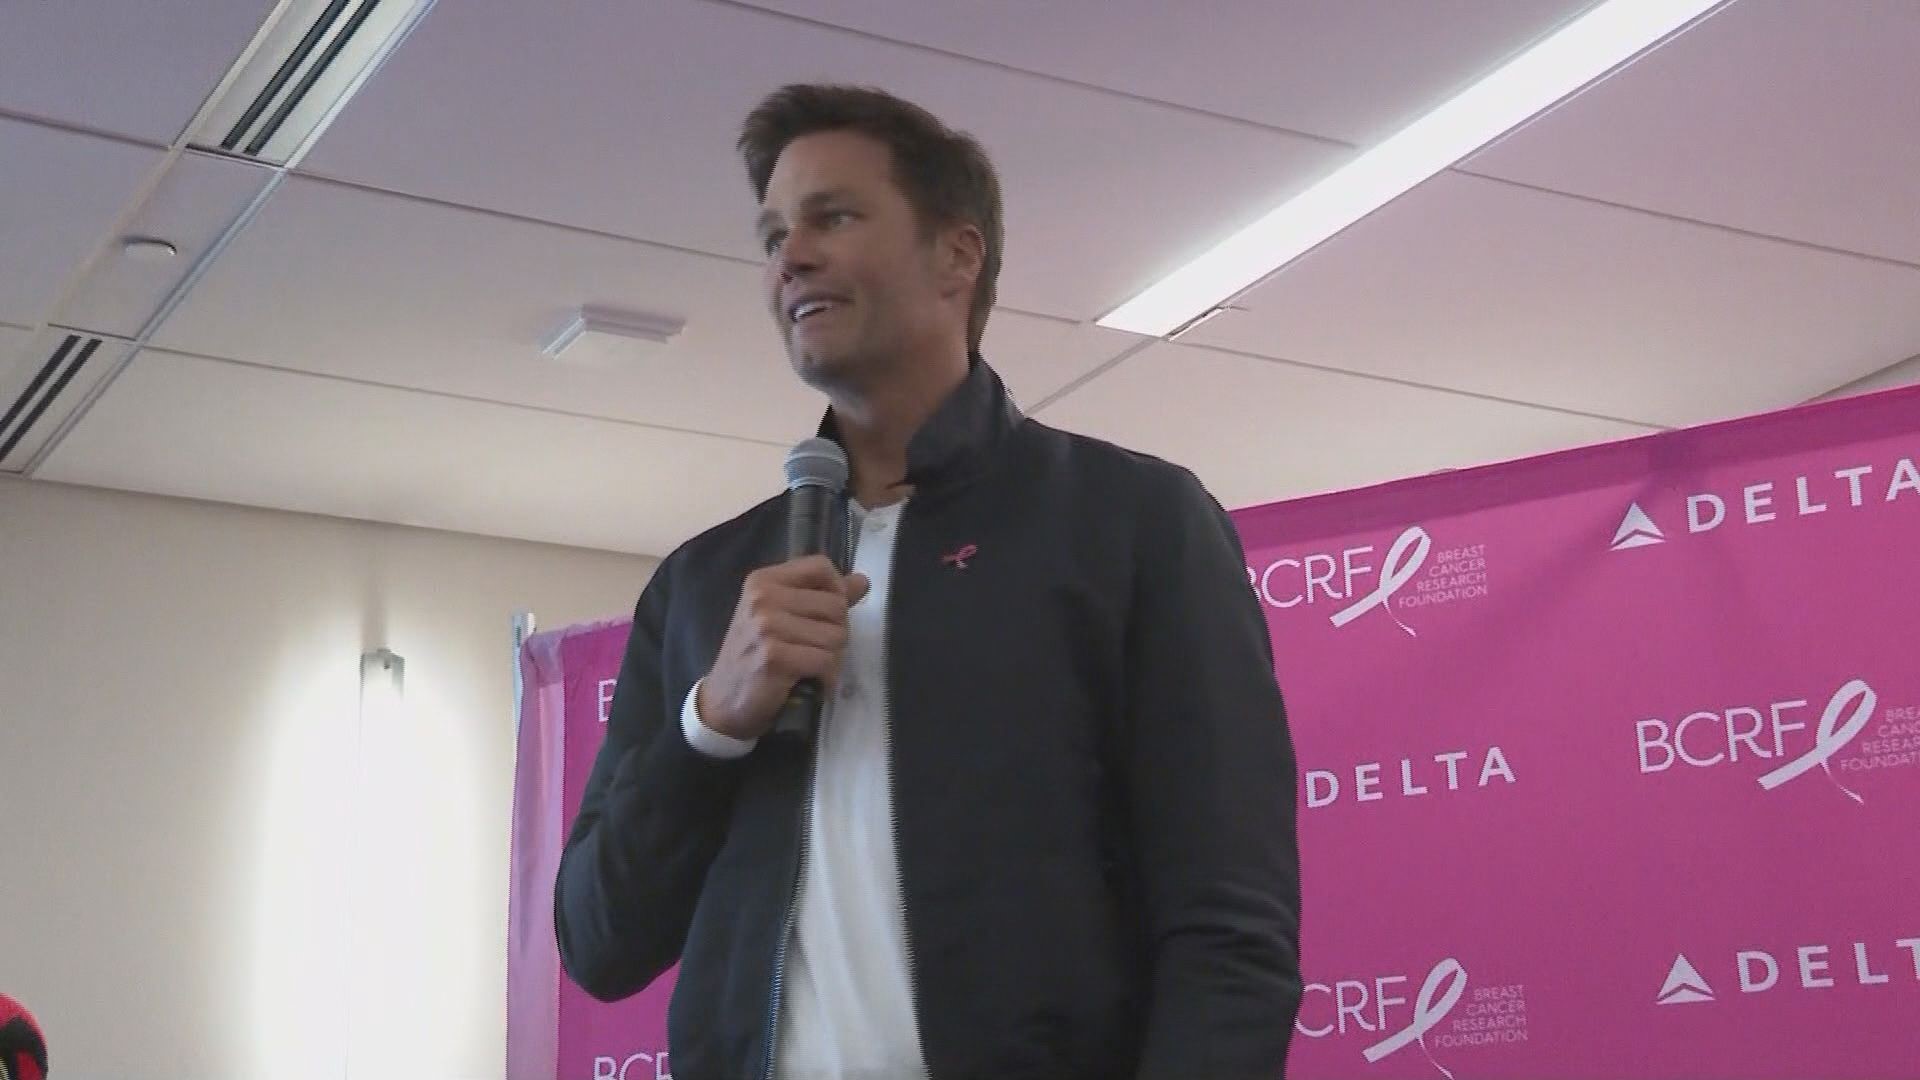 Brady sent those off on Delta's plane "Breast Cancer One."